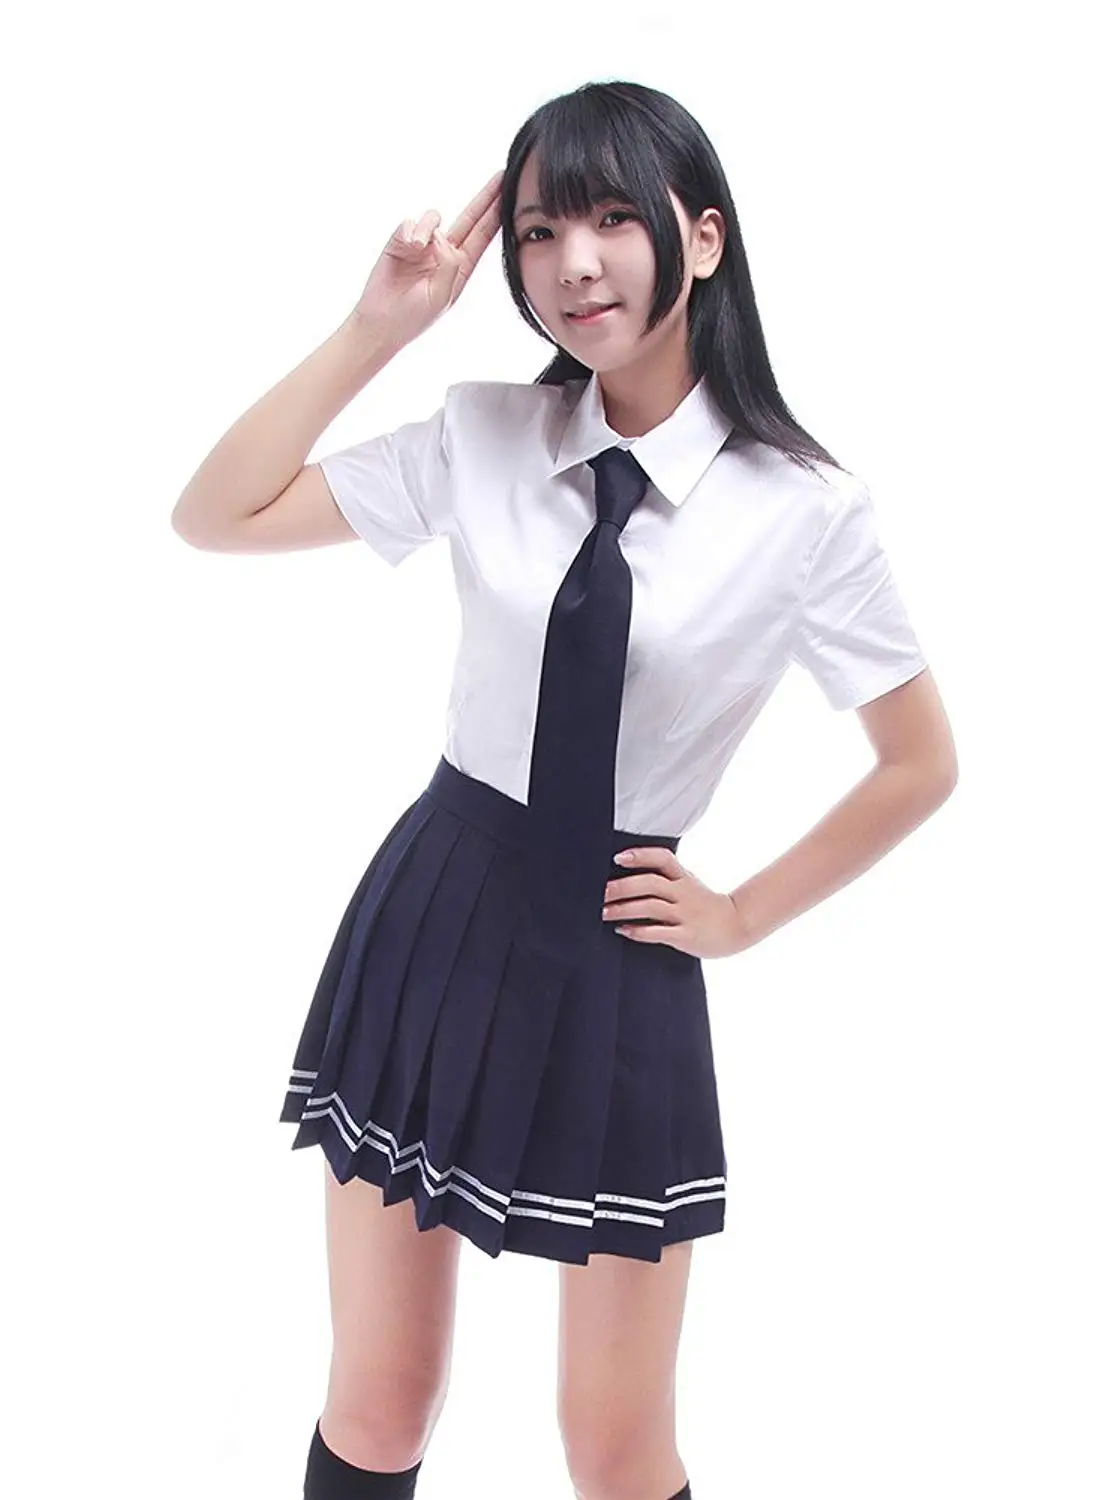 MSemis Girls Classic Pleated School Uniform Skirts Bowknot Scooter with Hidden Shorts 